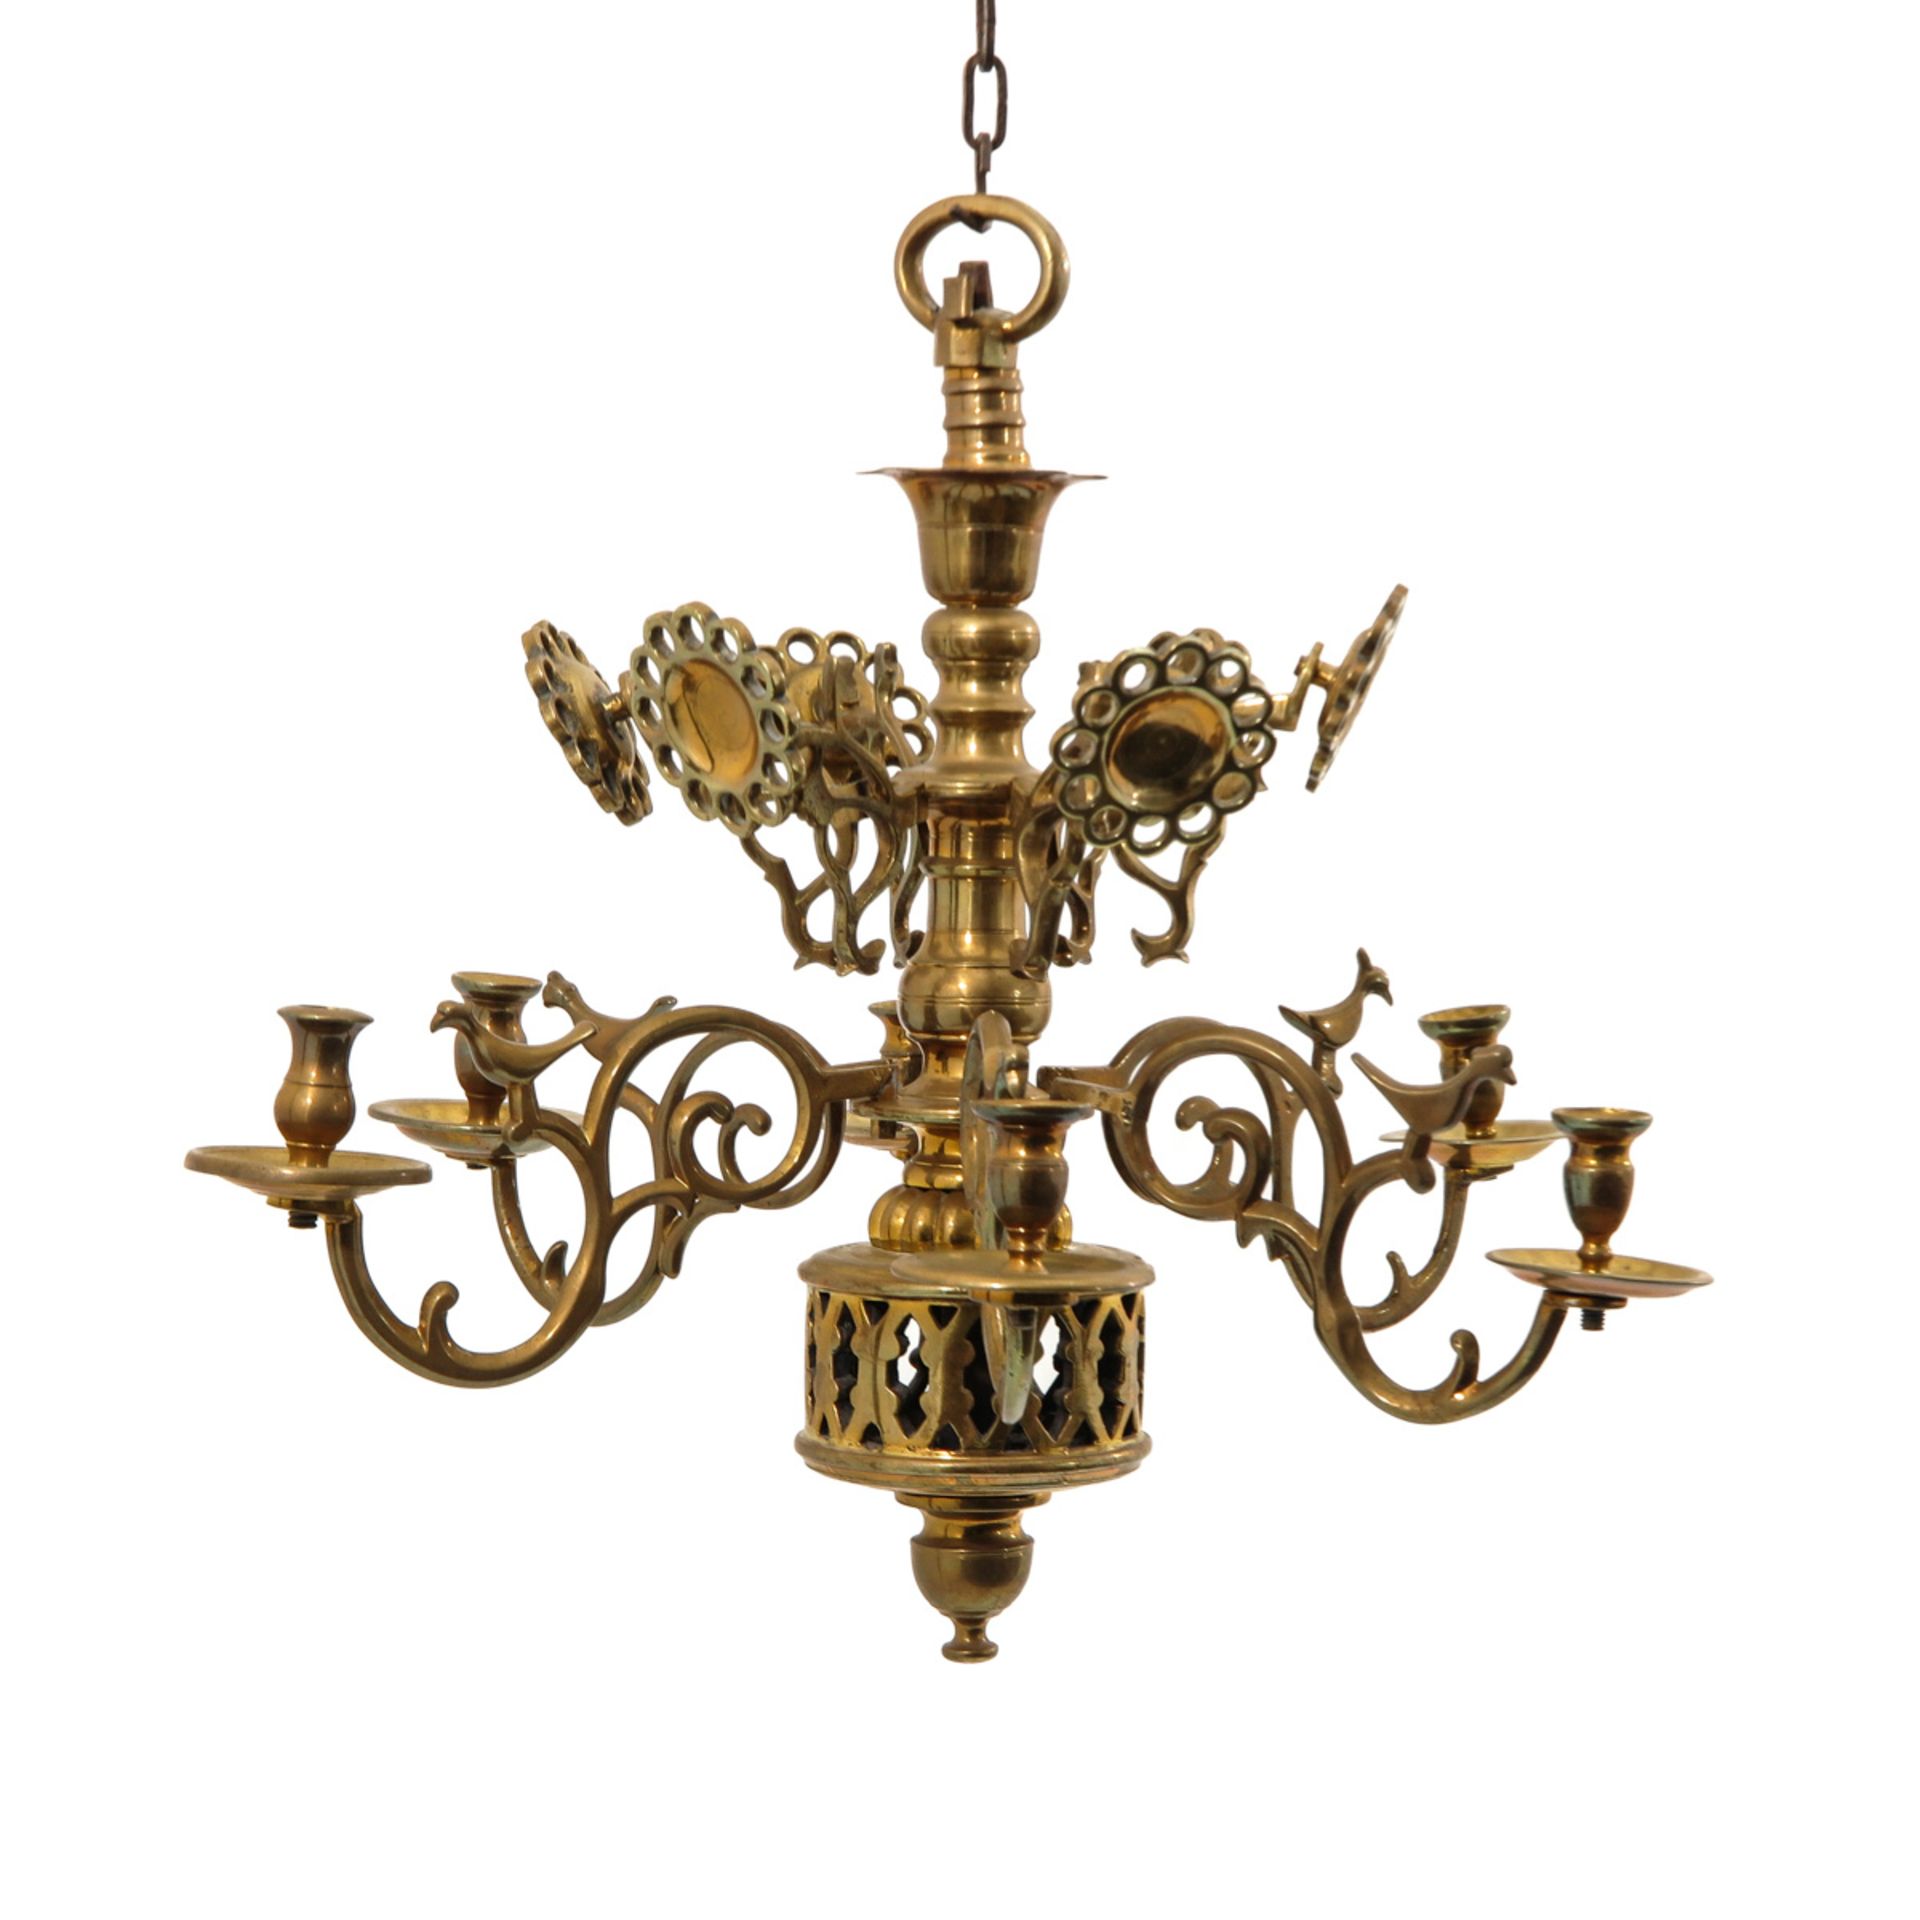 A Brass 18th Century Chandelier - Image 2 of 7